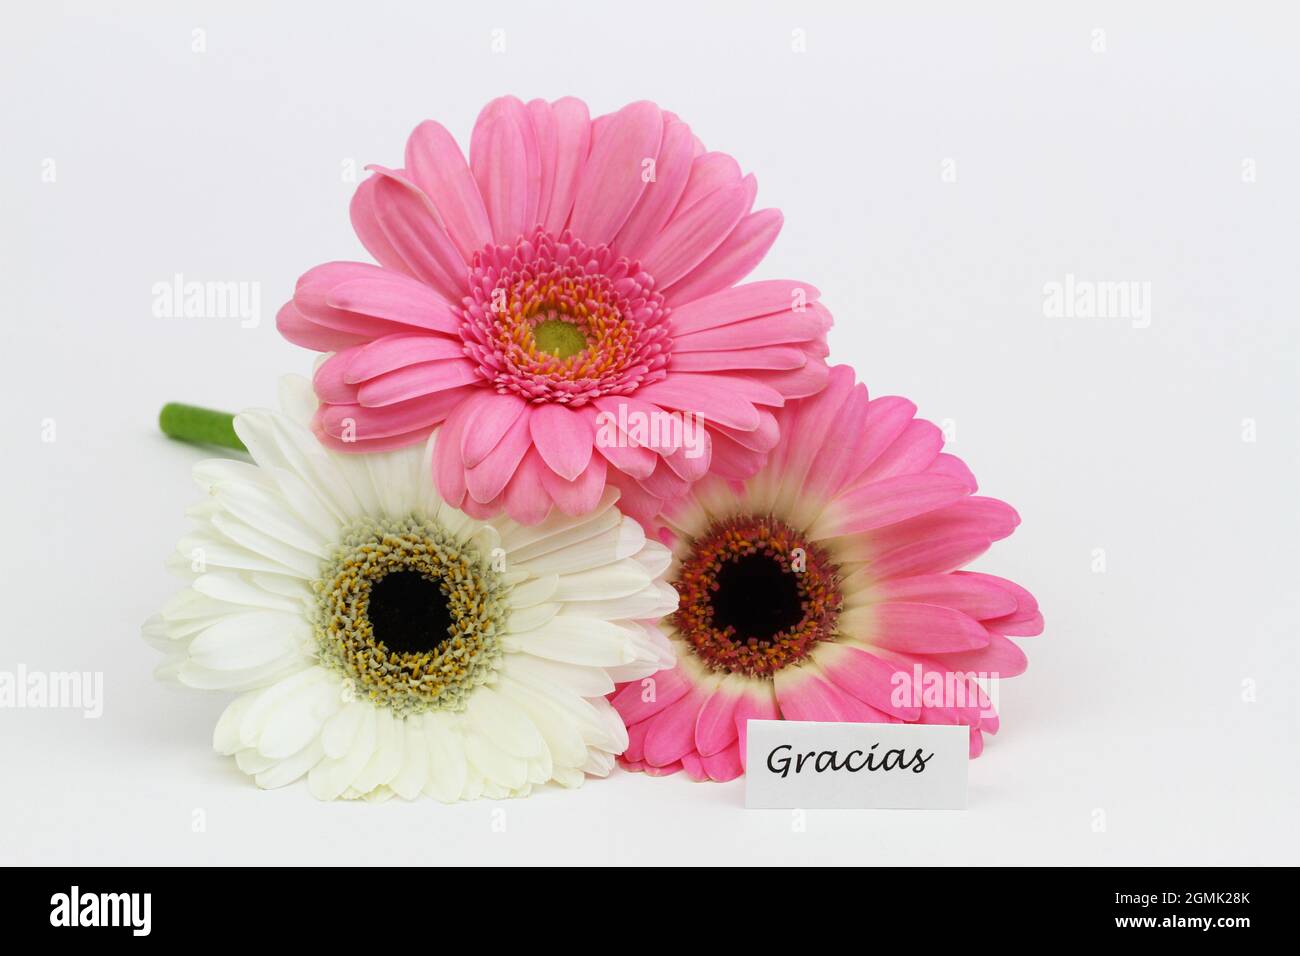 Gracias (thank you in Spanish) card with three beautiful white and pink gerbera daisies on white background Stock Photo